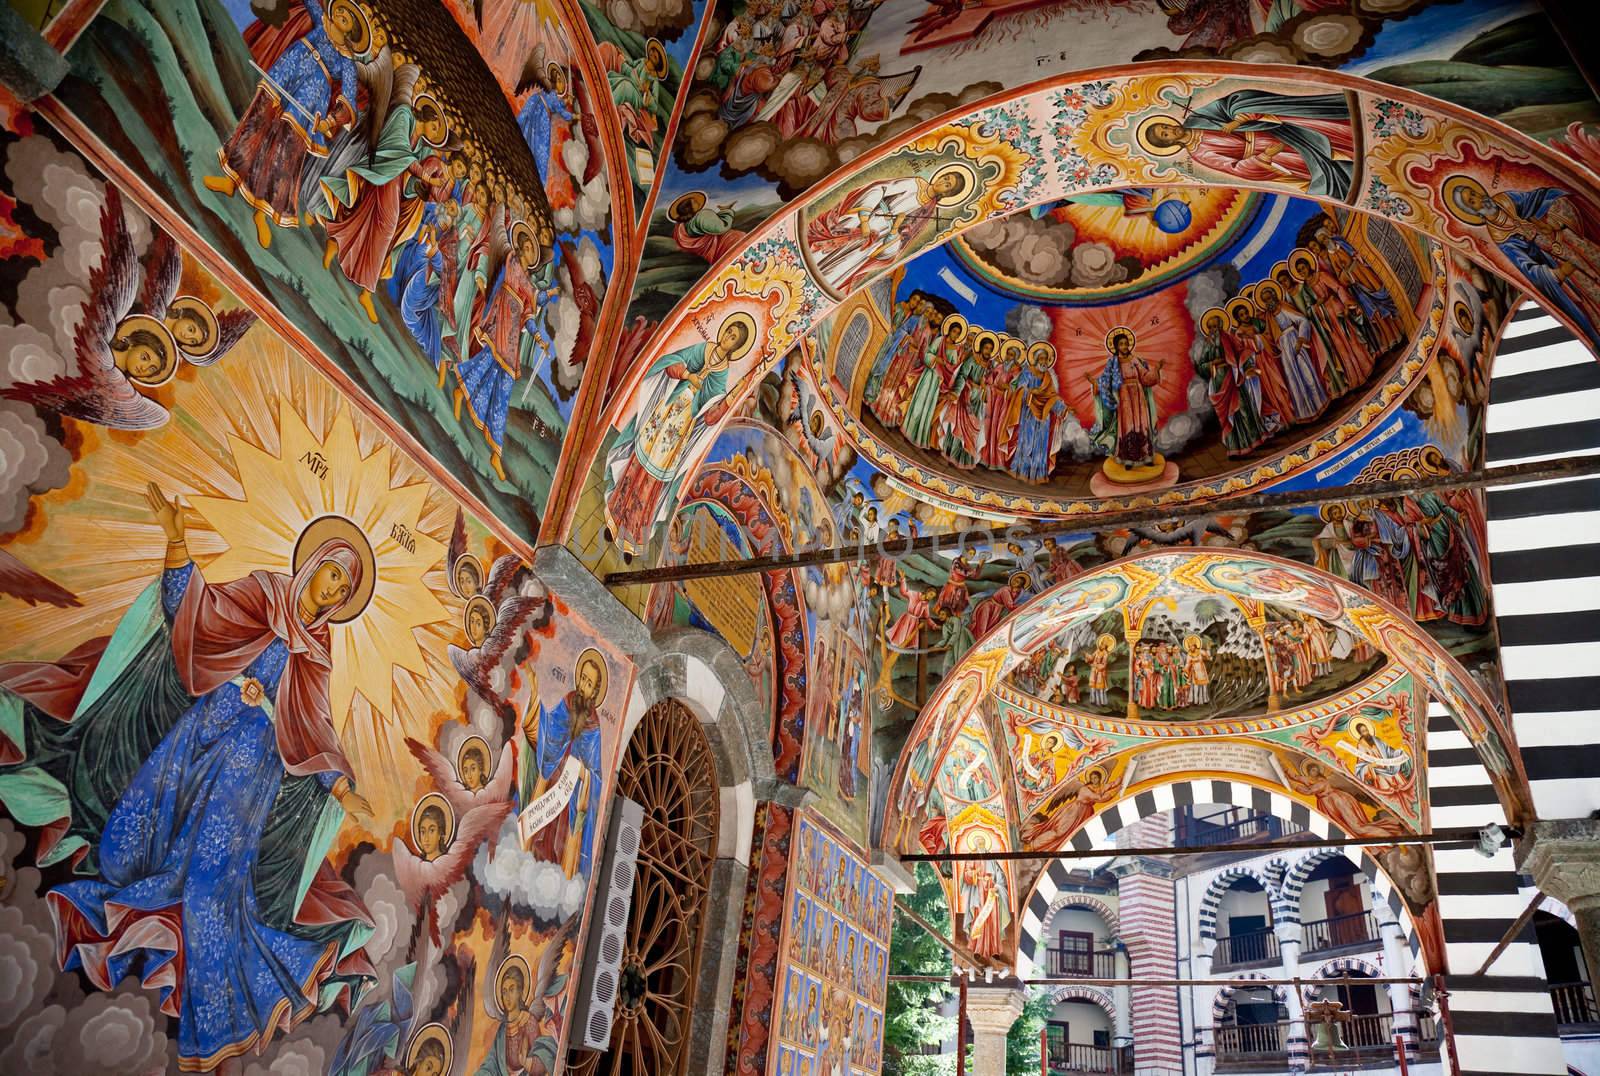 Frescos on the facade of The church of the Nativity of the Virgin, the main church in Rila monastery, painted 1840-1847